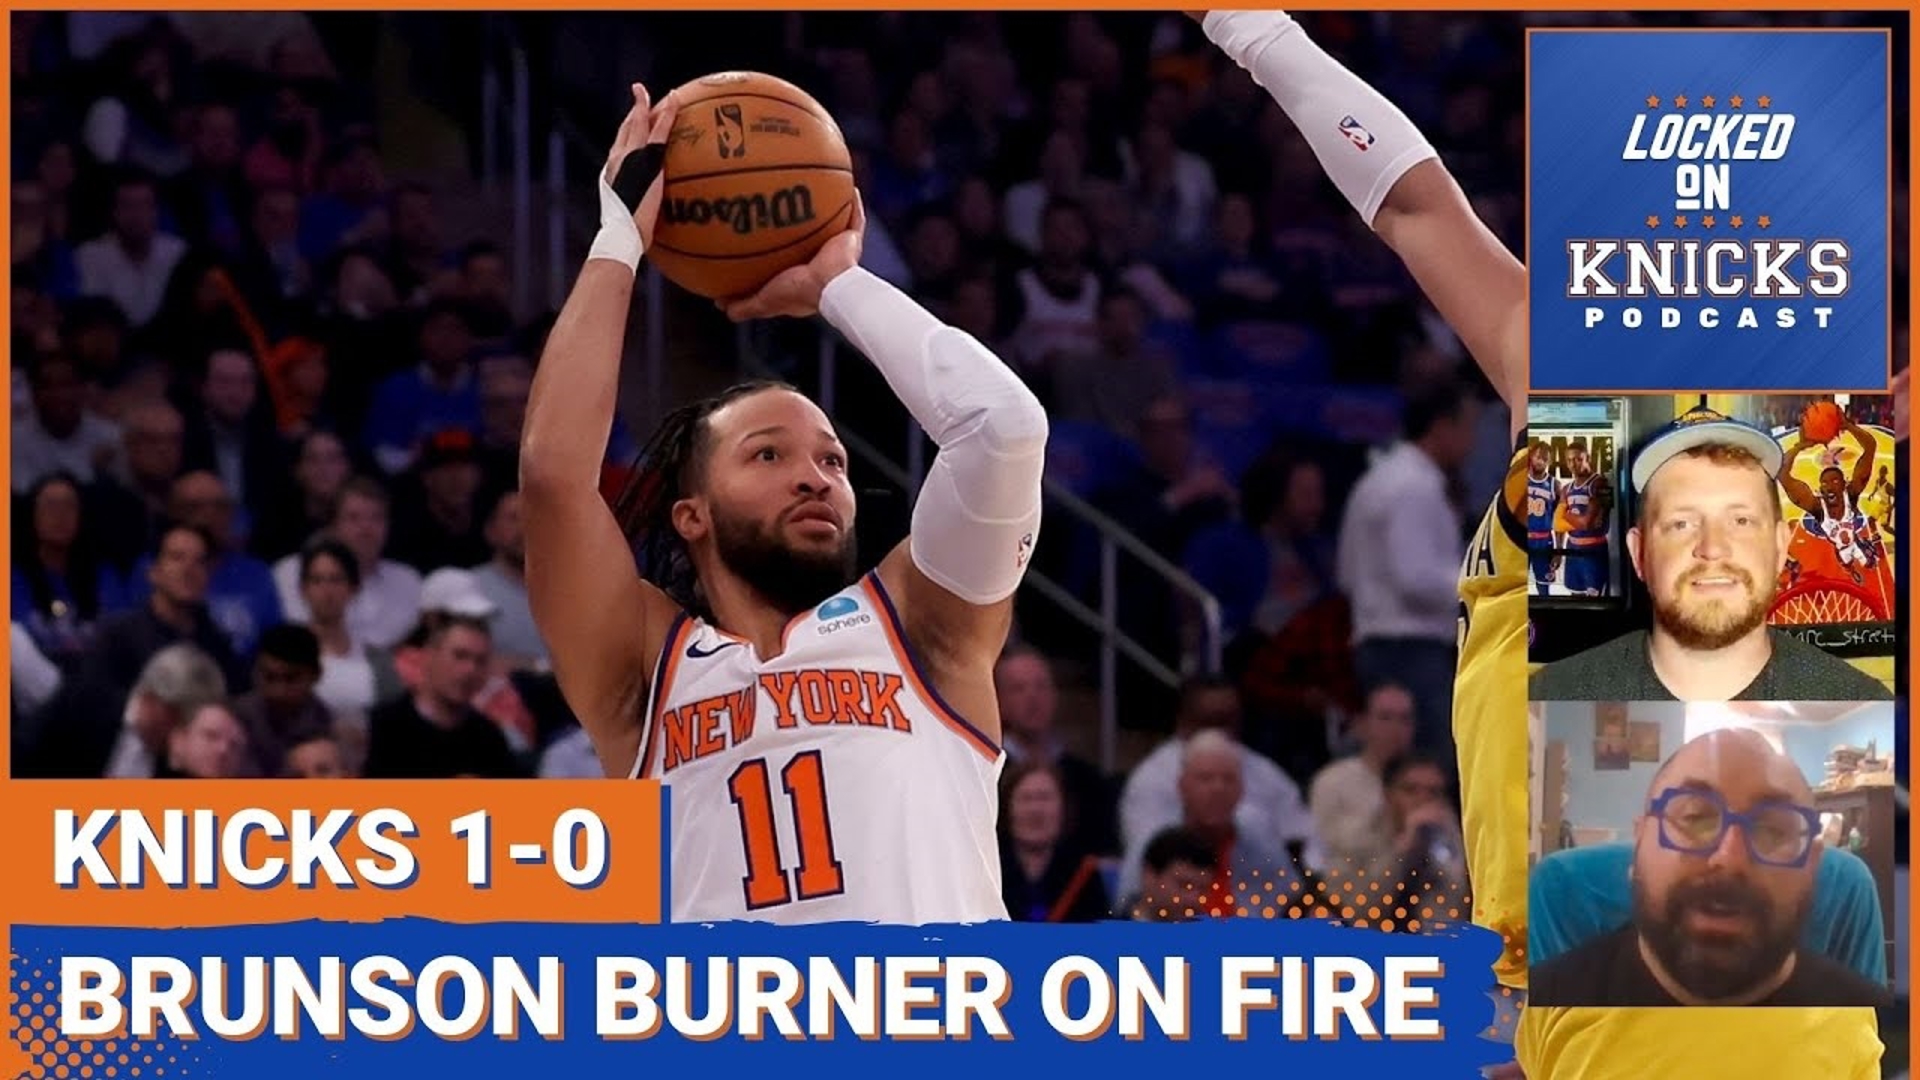 Alex is joined by Matthew Miranda of The Strickland (@MatthewEMiranda on Twitter) to break down the Knicks' thrilling 121-117 win over the Pacers.